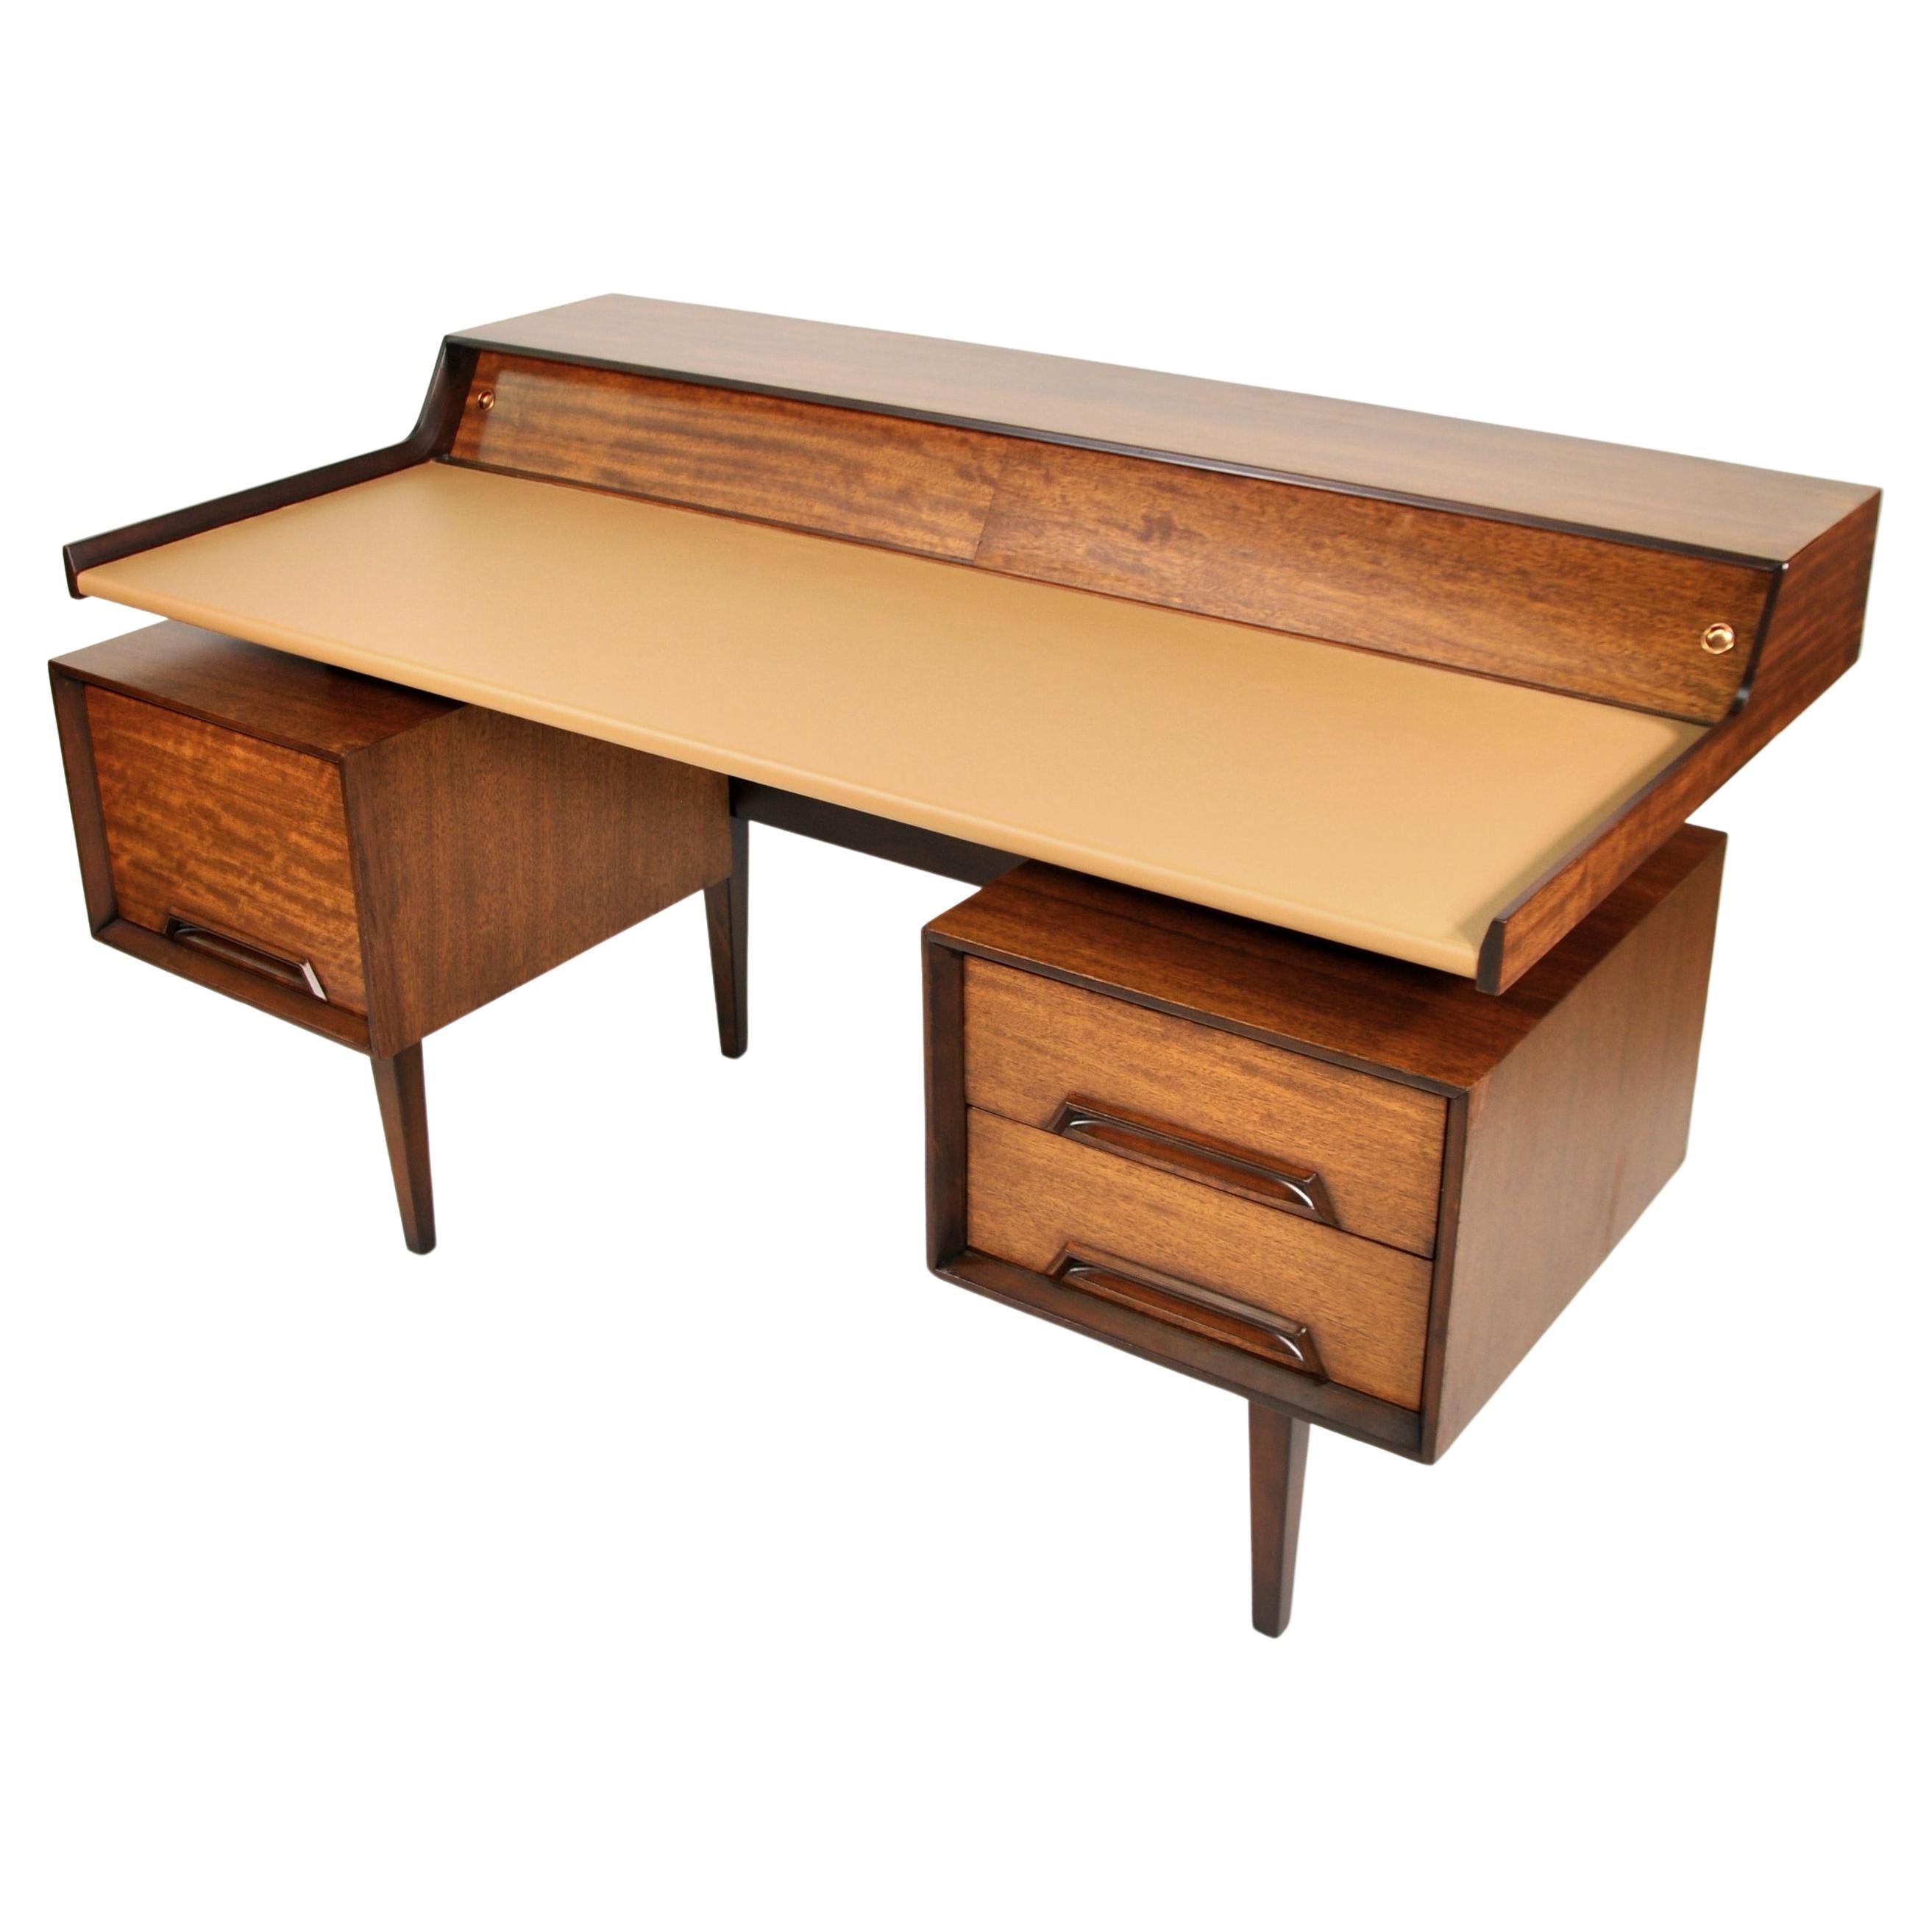 Milo Baughman for Drexel Perspective Mindoro and Leather Desk 4